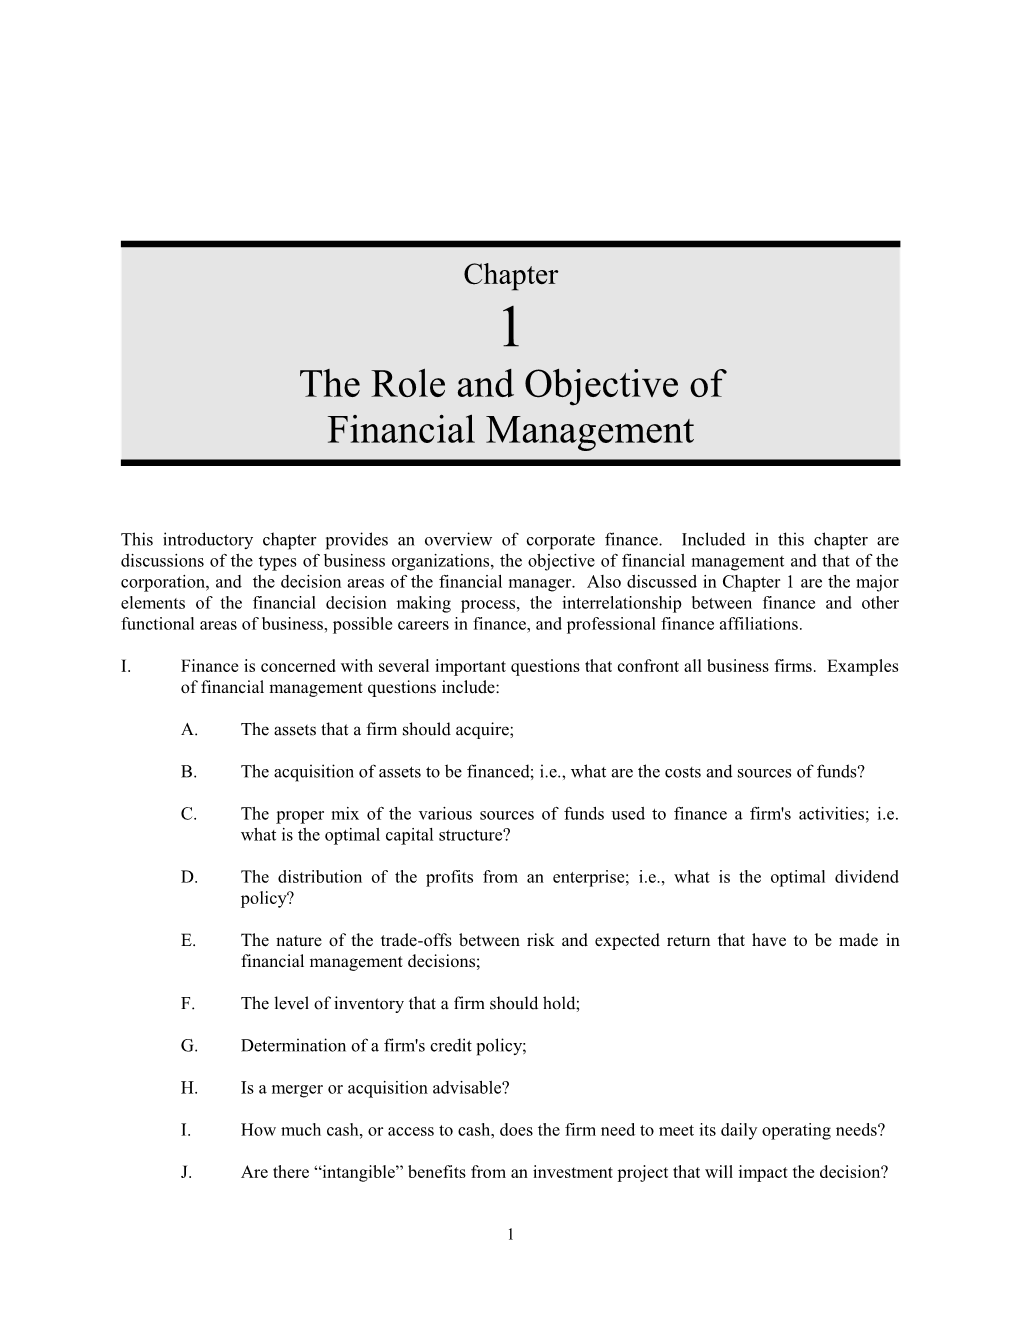 Chapter 1/The Role and Objective of Financial Management